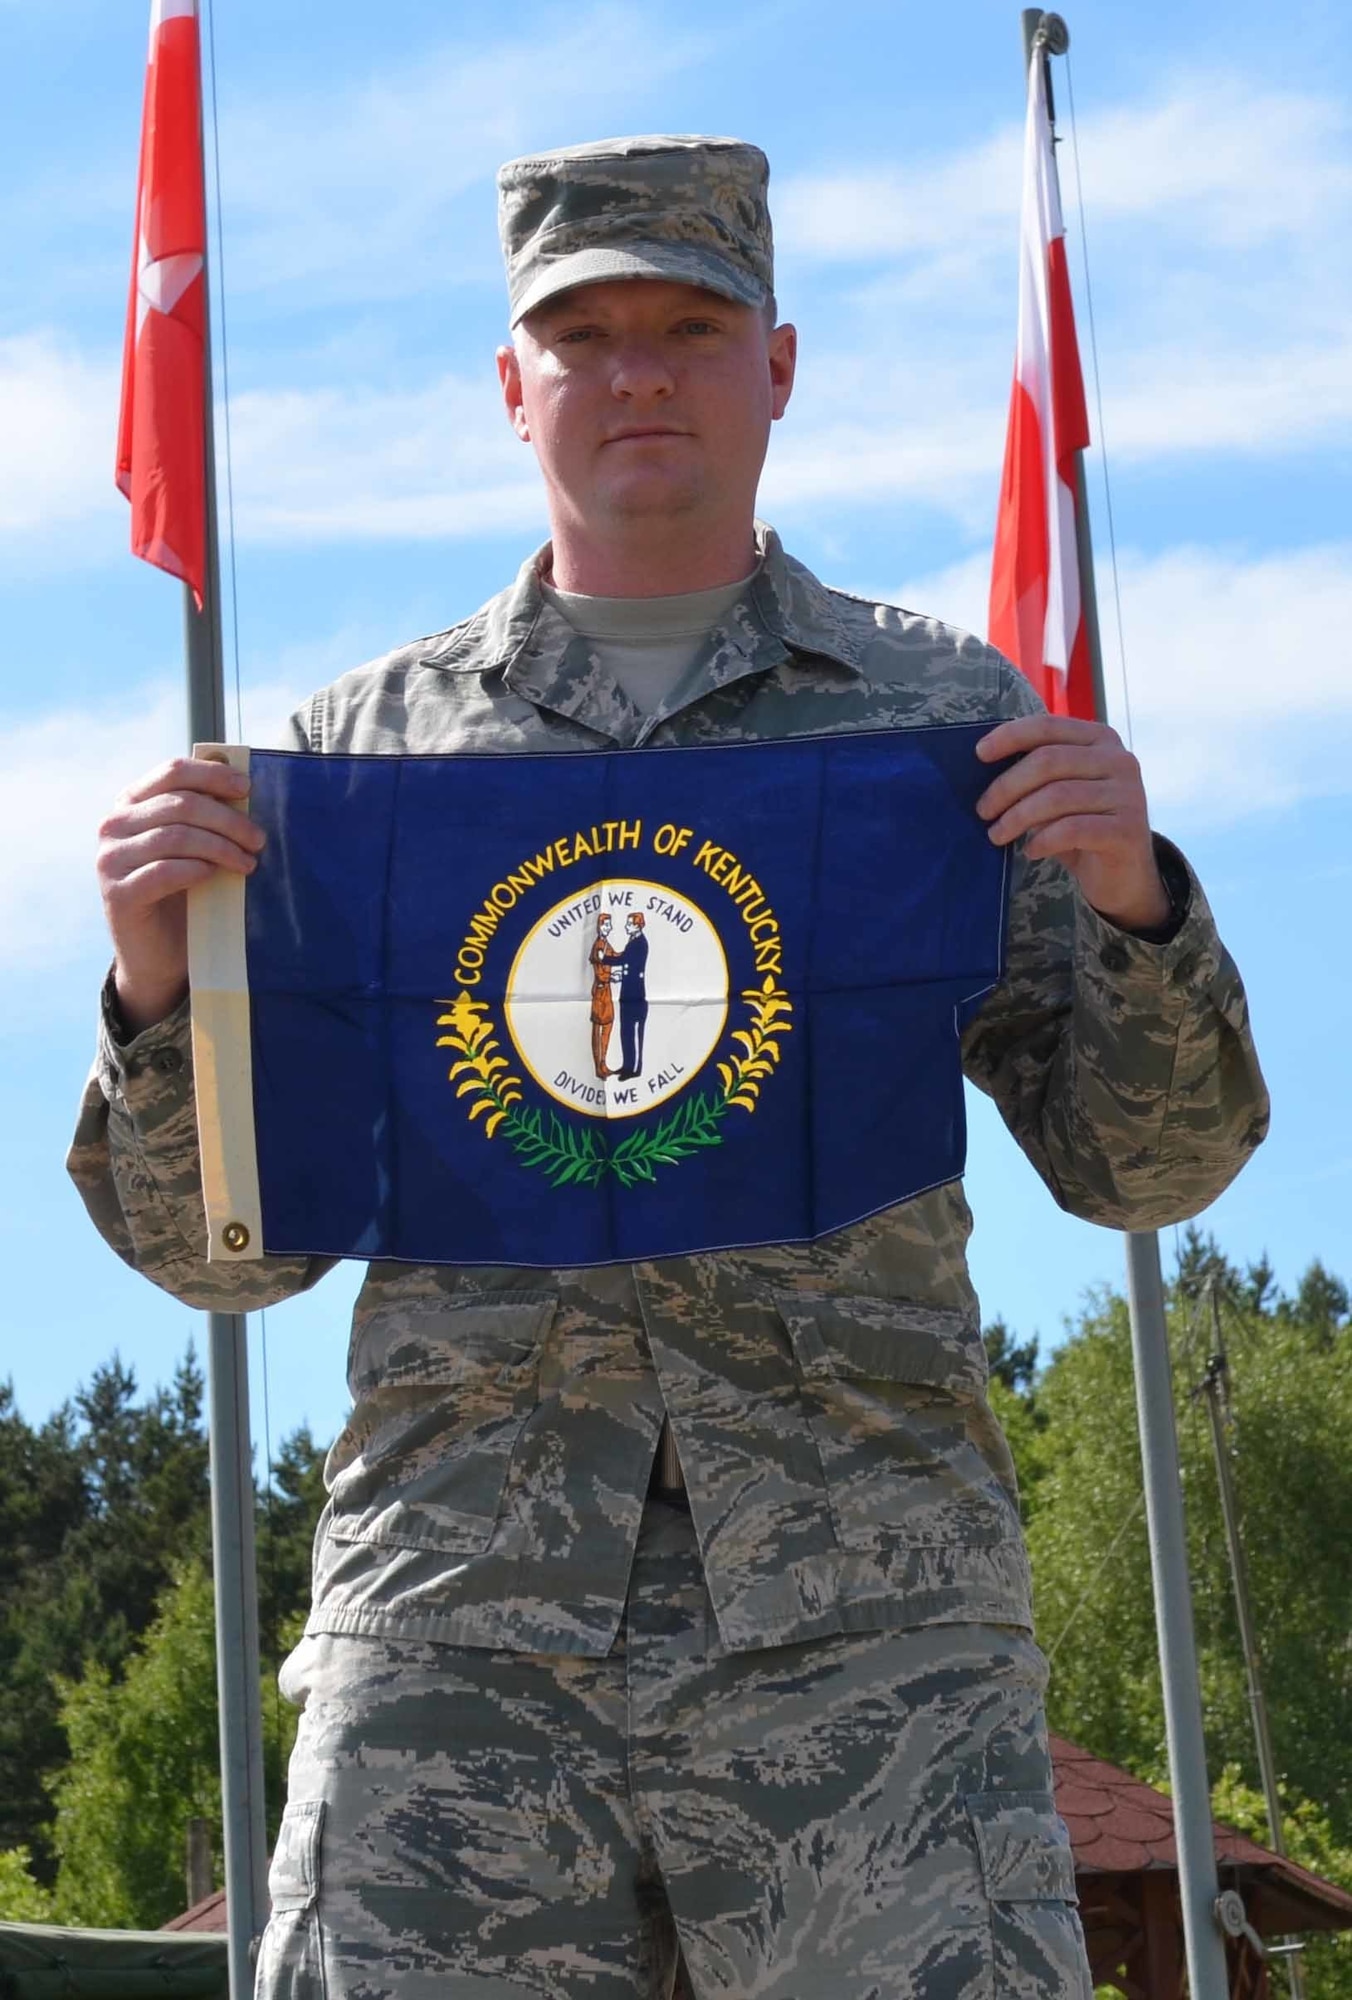 Senior Airman Steven Adkins, a broadcast journalist assigned to American Forces Network, Spangdahlem, Air Base, Germany, proudly displays his state flag given to him by his grandfather Don Adkins June 7, 2015, during an assignment for Saber Strike 15 in the Drawsko Pomorskie Training Area in Poland. Saber Strike is a long-standing U.S. Army Europe-led cooperative training exercise. This year’s exercise objectives facilitate cooperation amongst the U.S., Estonia, Latvia, Lithuania, and Poland to improve joint operational capability in a range of missions as well as preparing the participating nations and units to support multinational contingency operations. (U.S. Army photo by Sgt. Brandon Anderson, 13th Public Affairs Detachment/Released.)